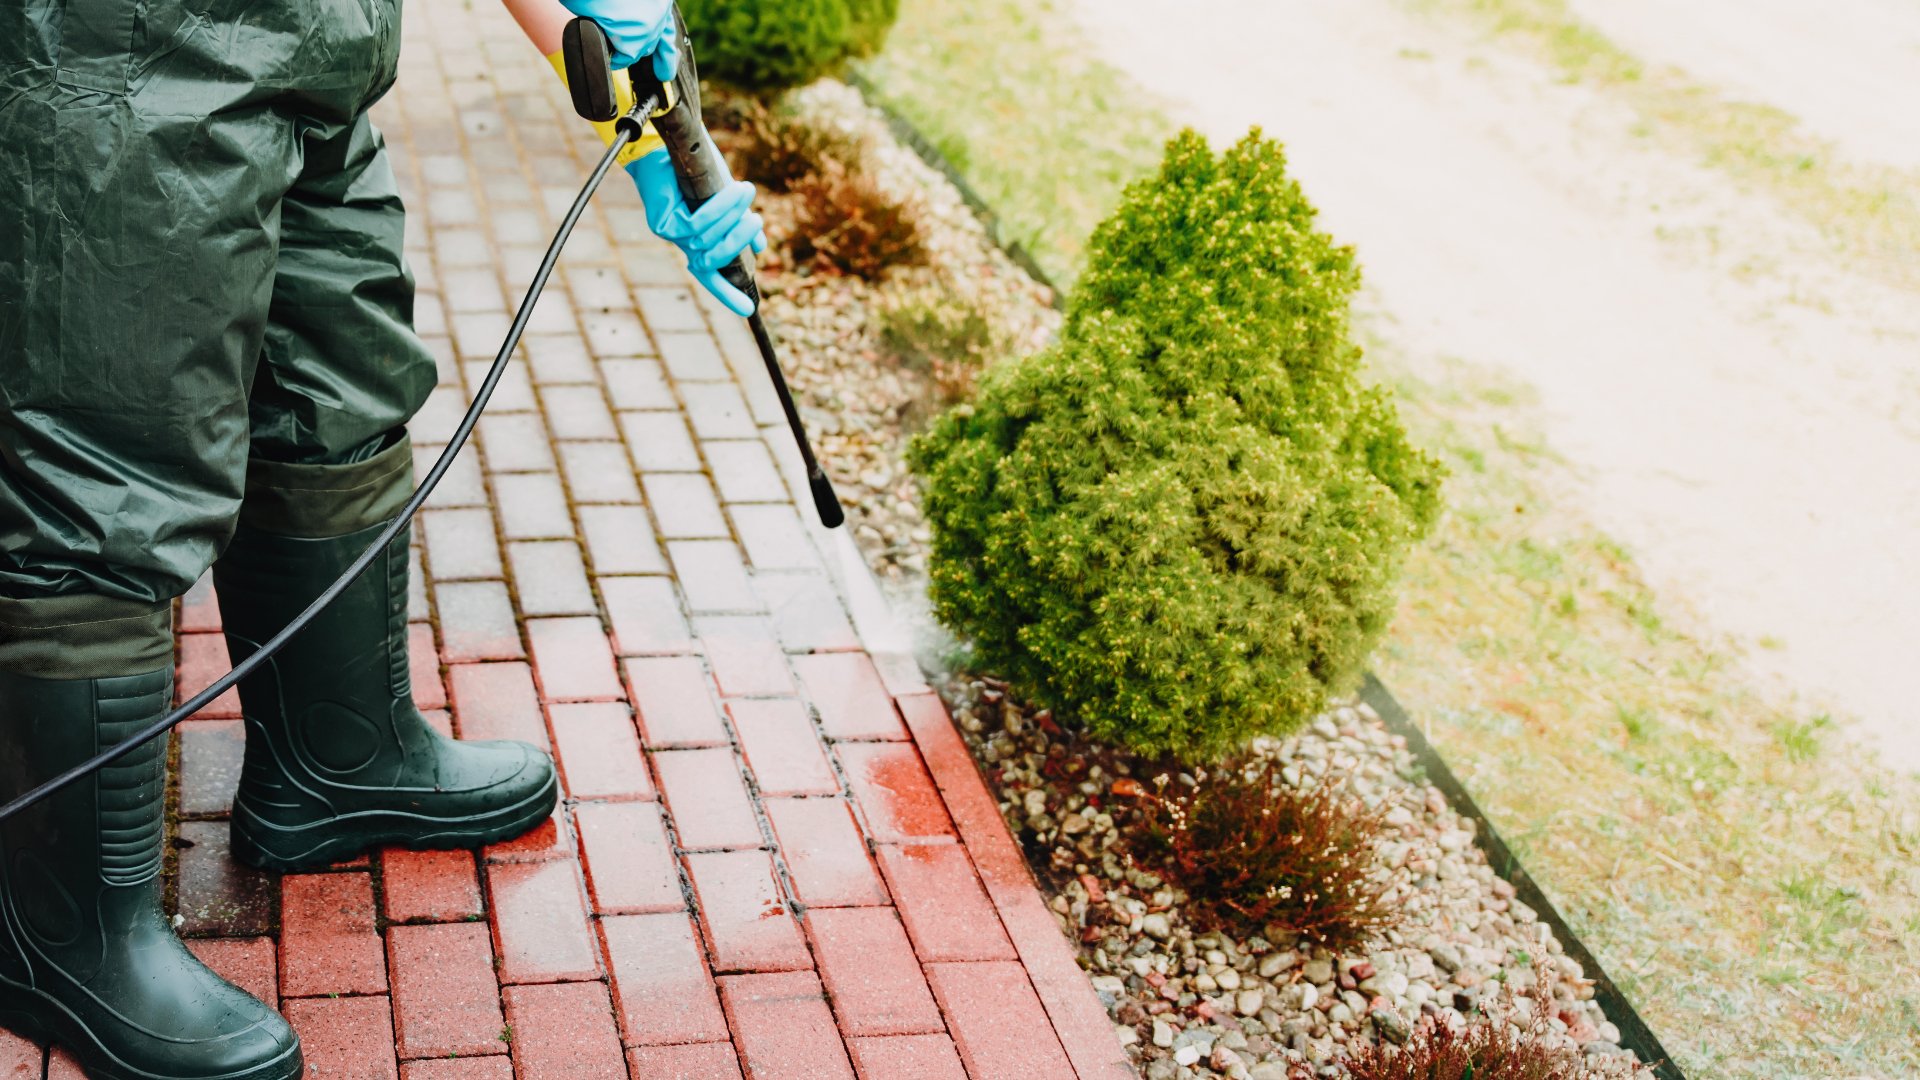 Here's What to Expect When Pros Clean & Seal Your Hardscapes